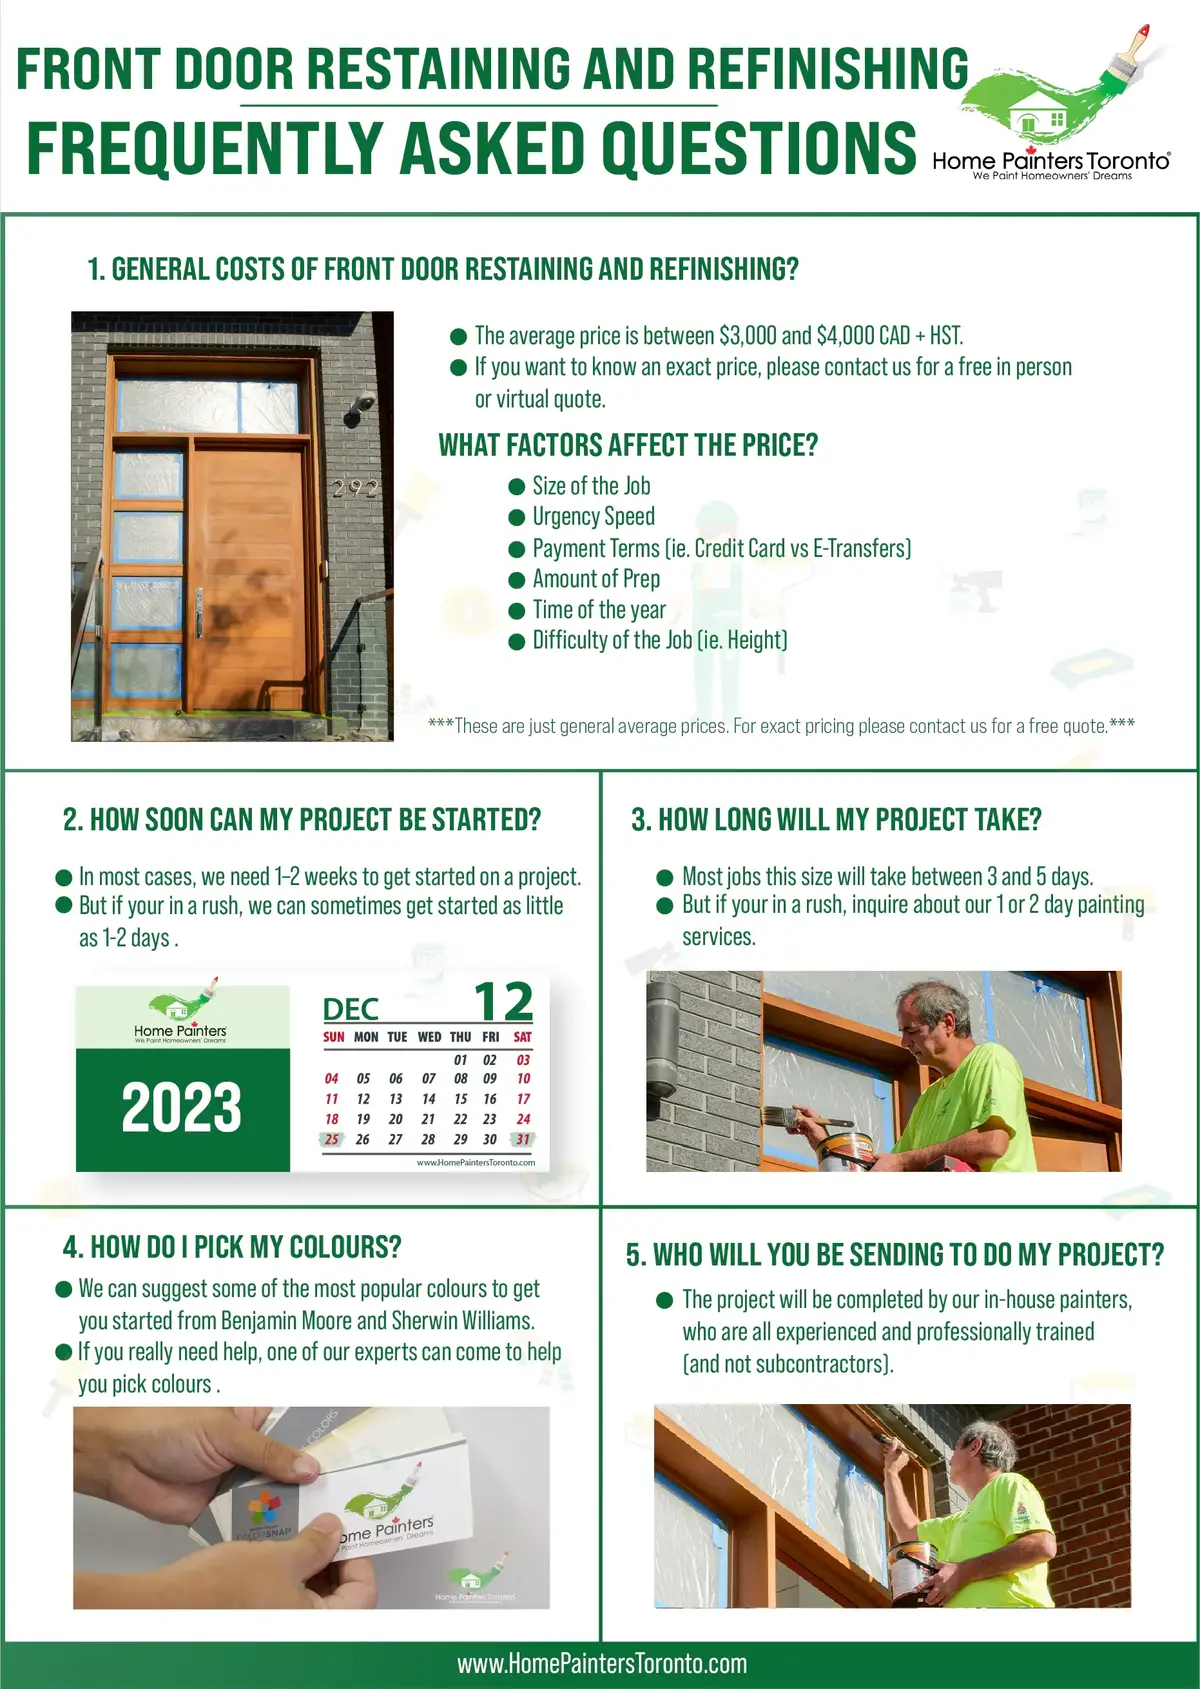 Infographic of frequently asked questions about exterior front door restaining and refinishing